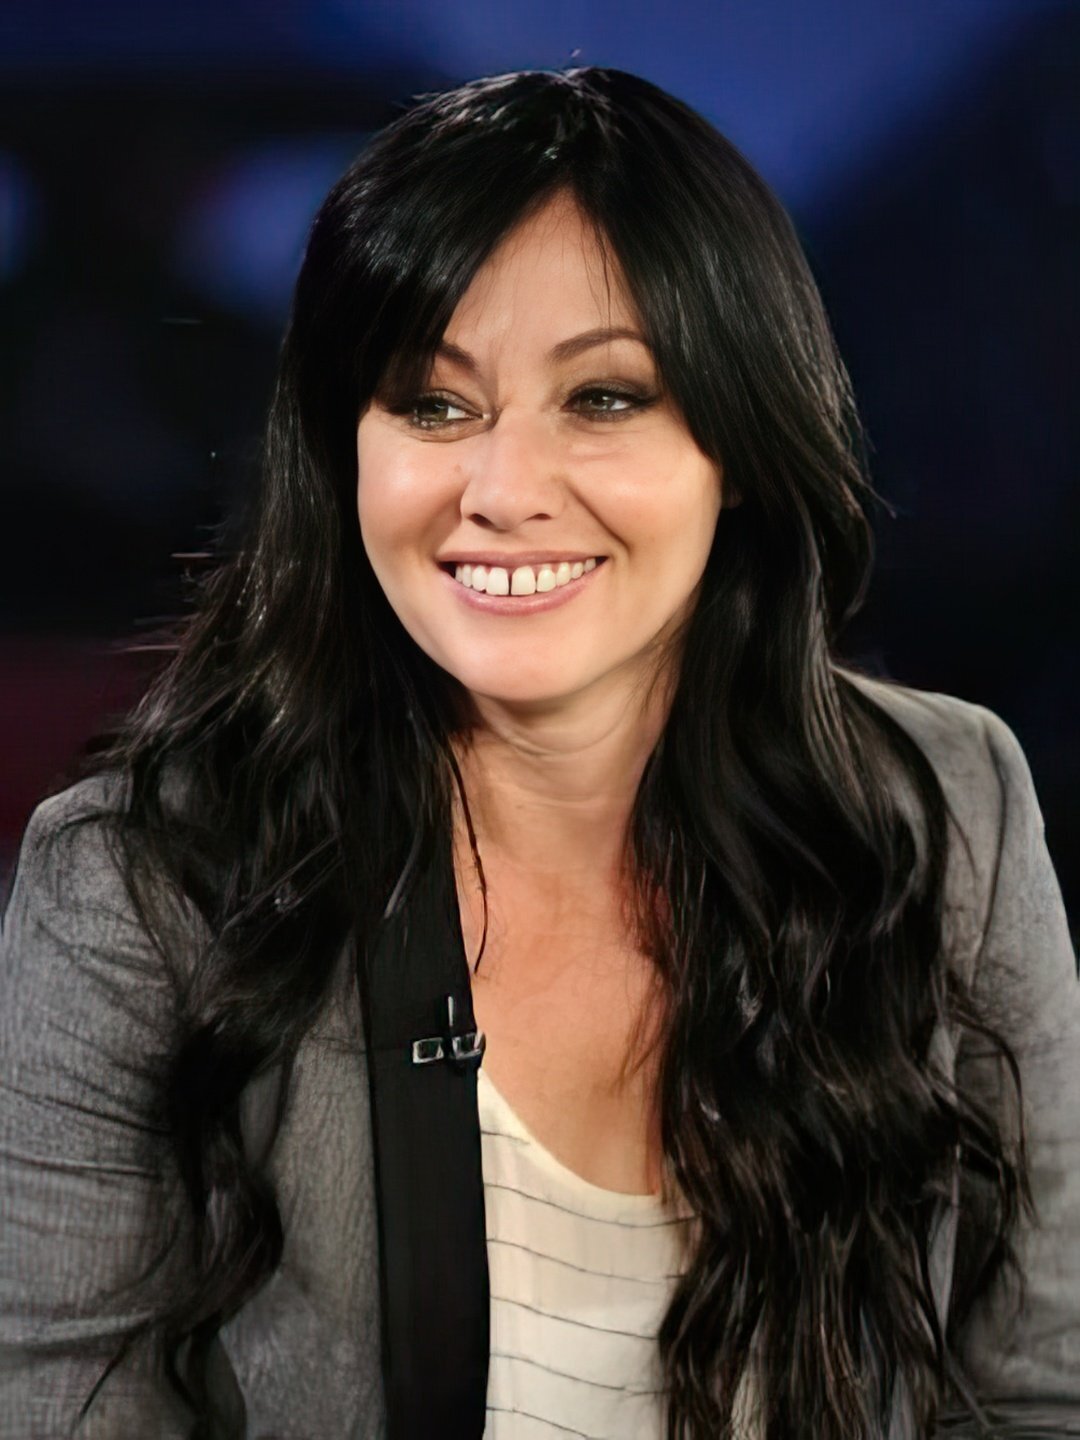 Shannen Doherty where is she now